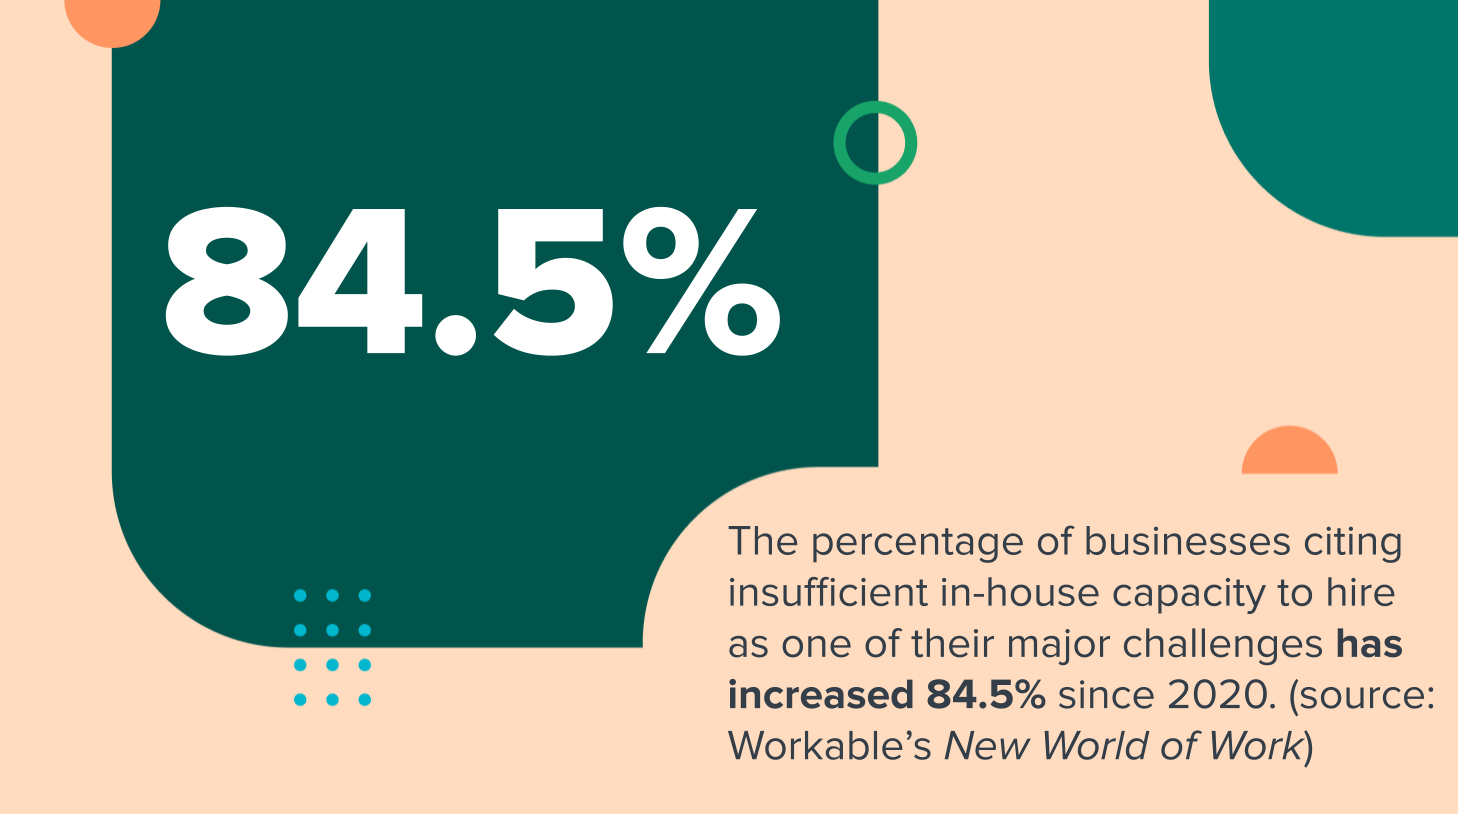 The percentage of businesses citing insufficient in-house capacity to hire as one of their major challenges has increased 84.5% since 2020